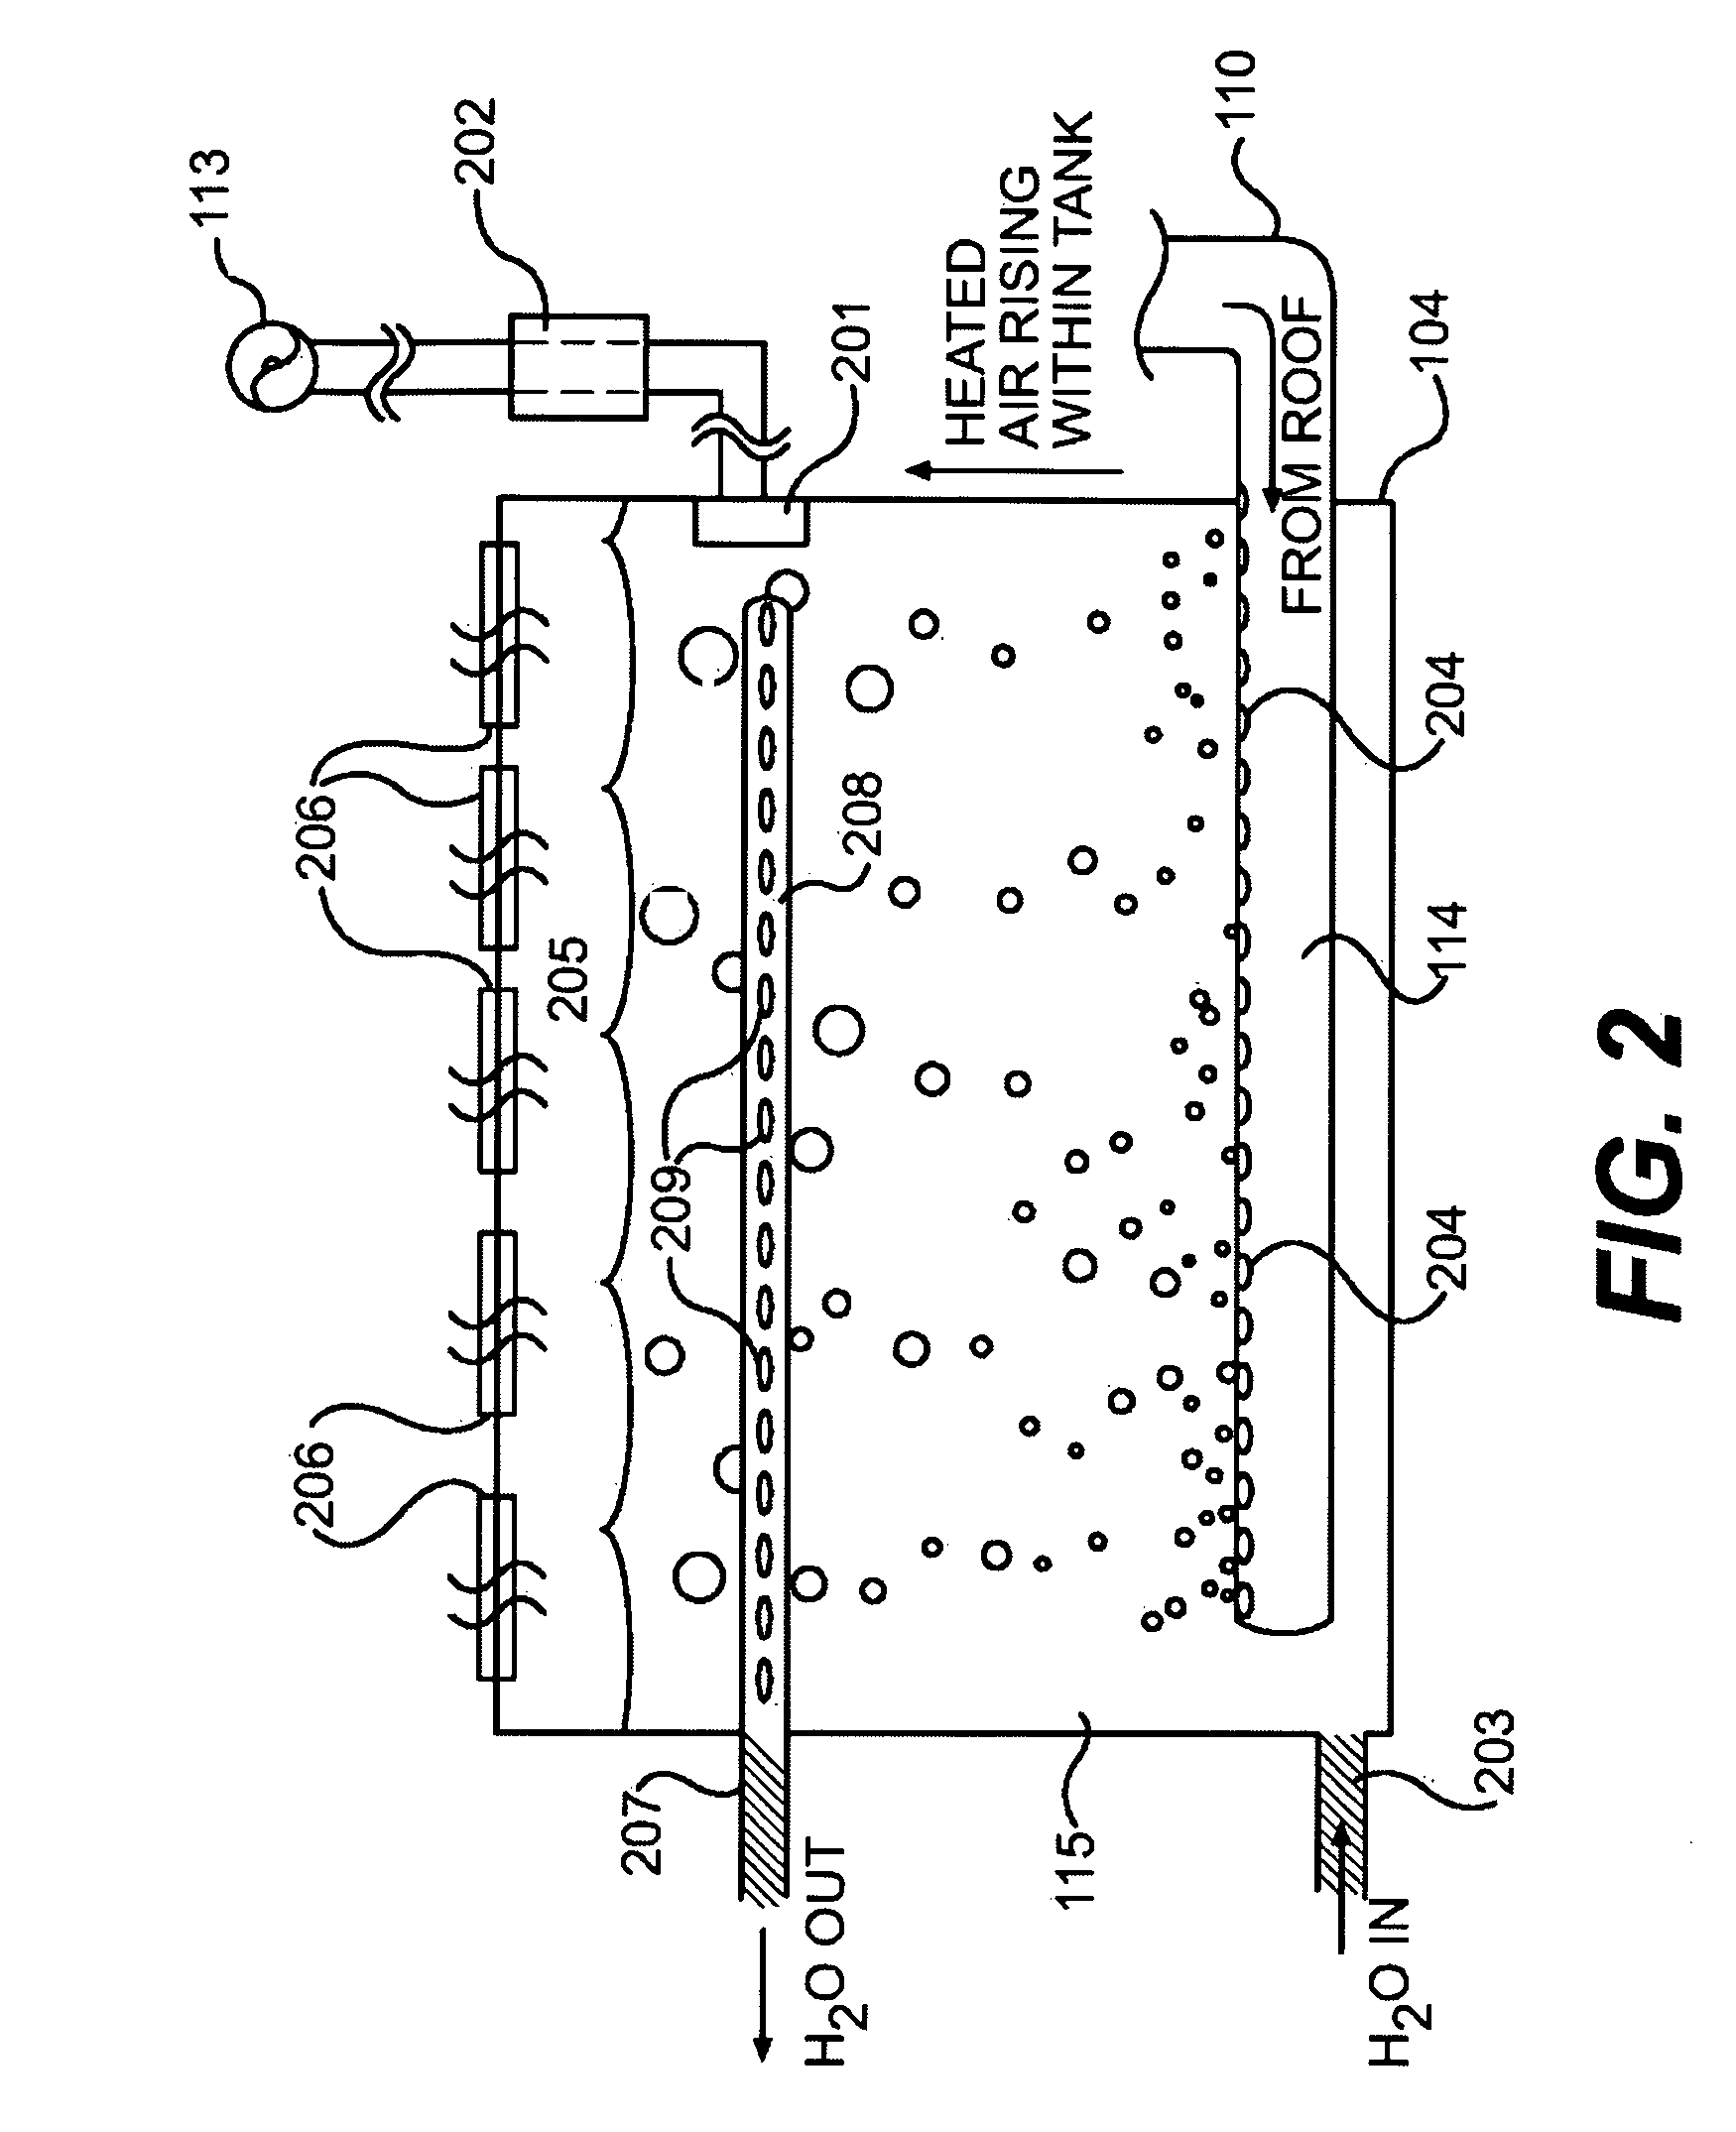 Method and device for capture, storage and recirculation of heat energy